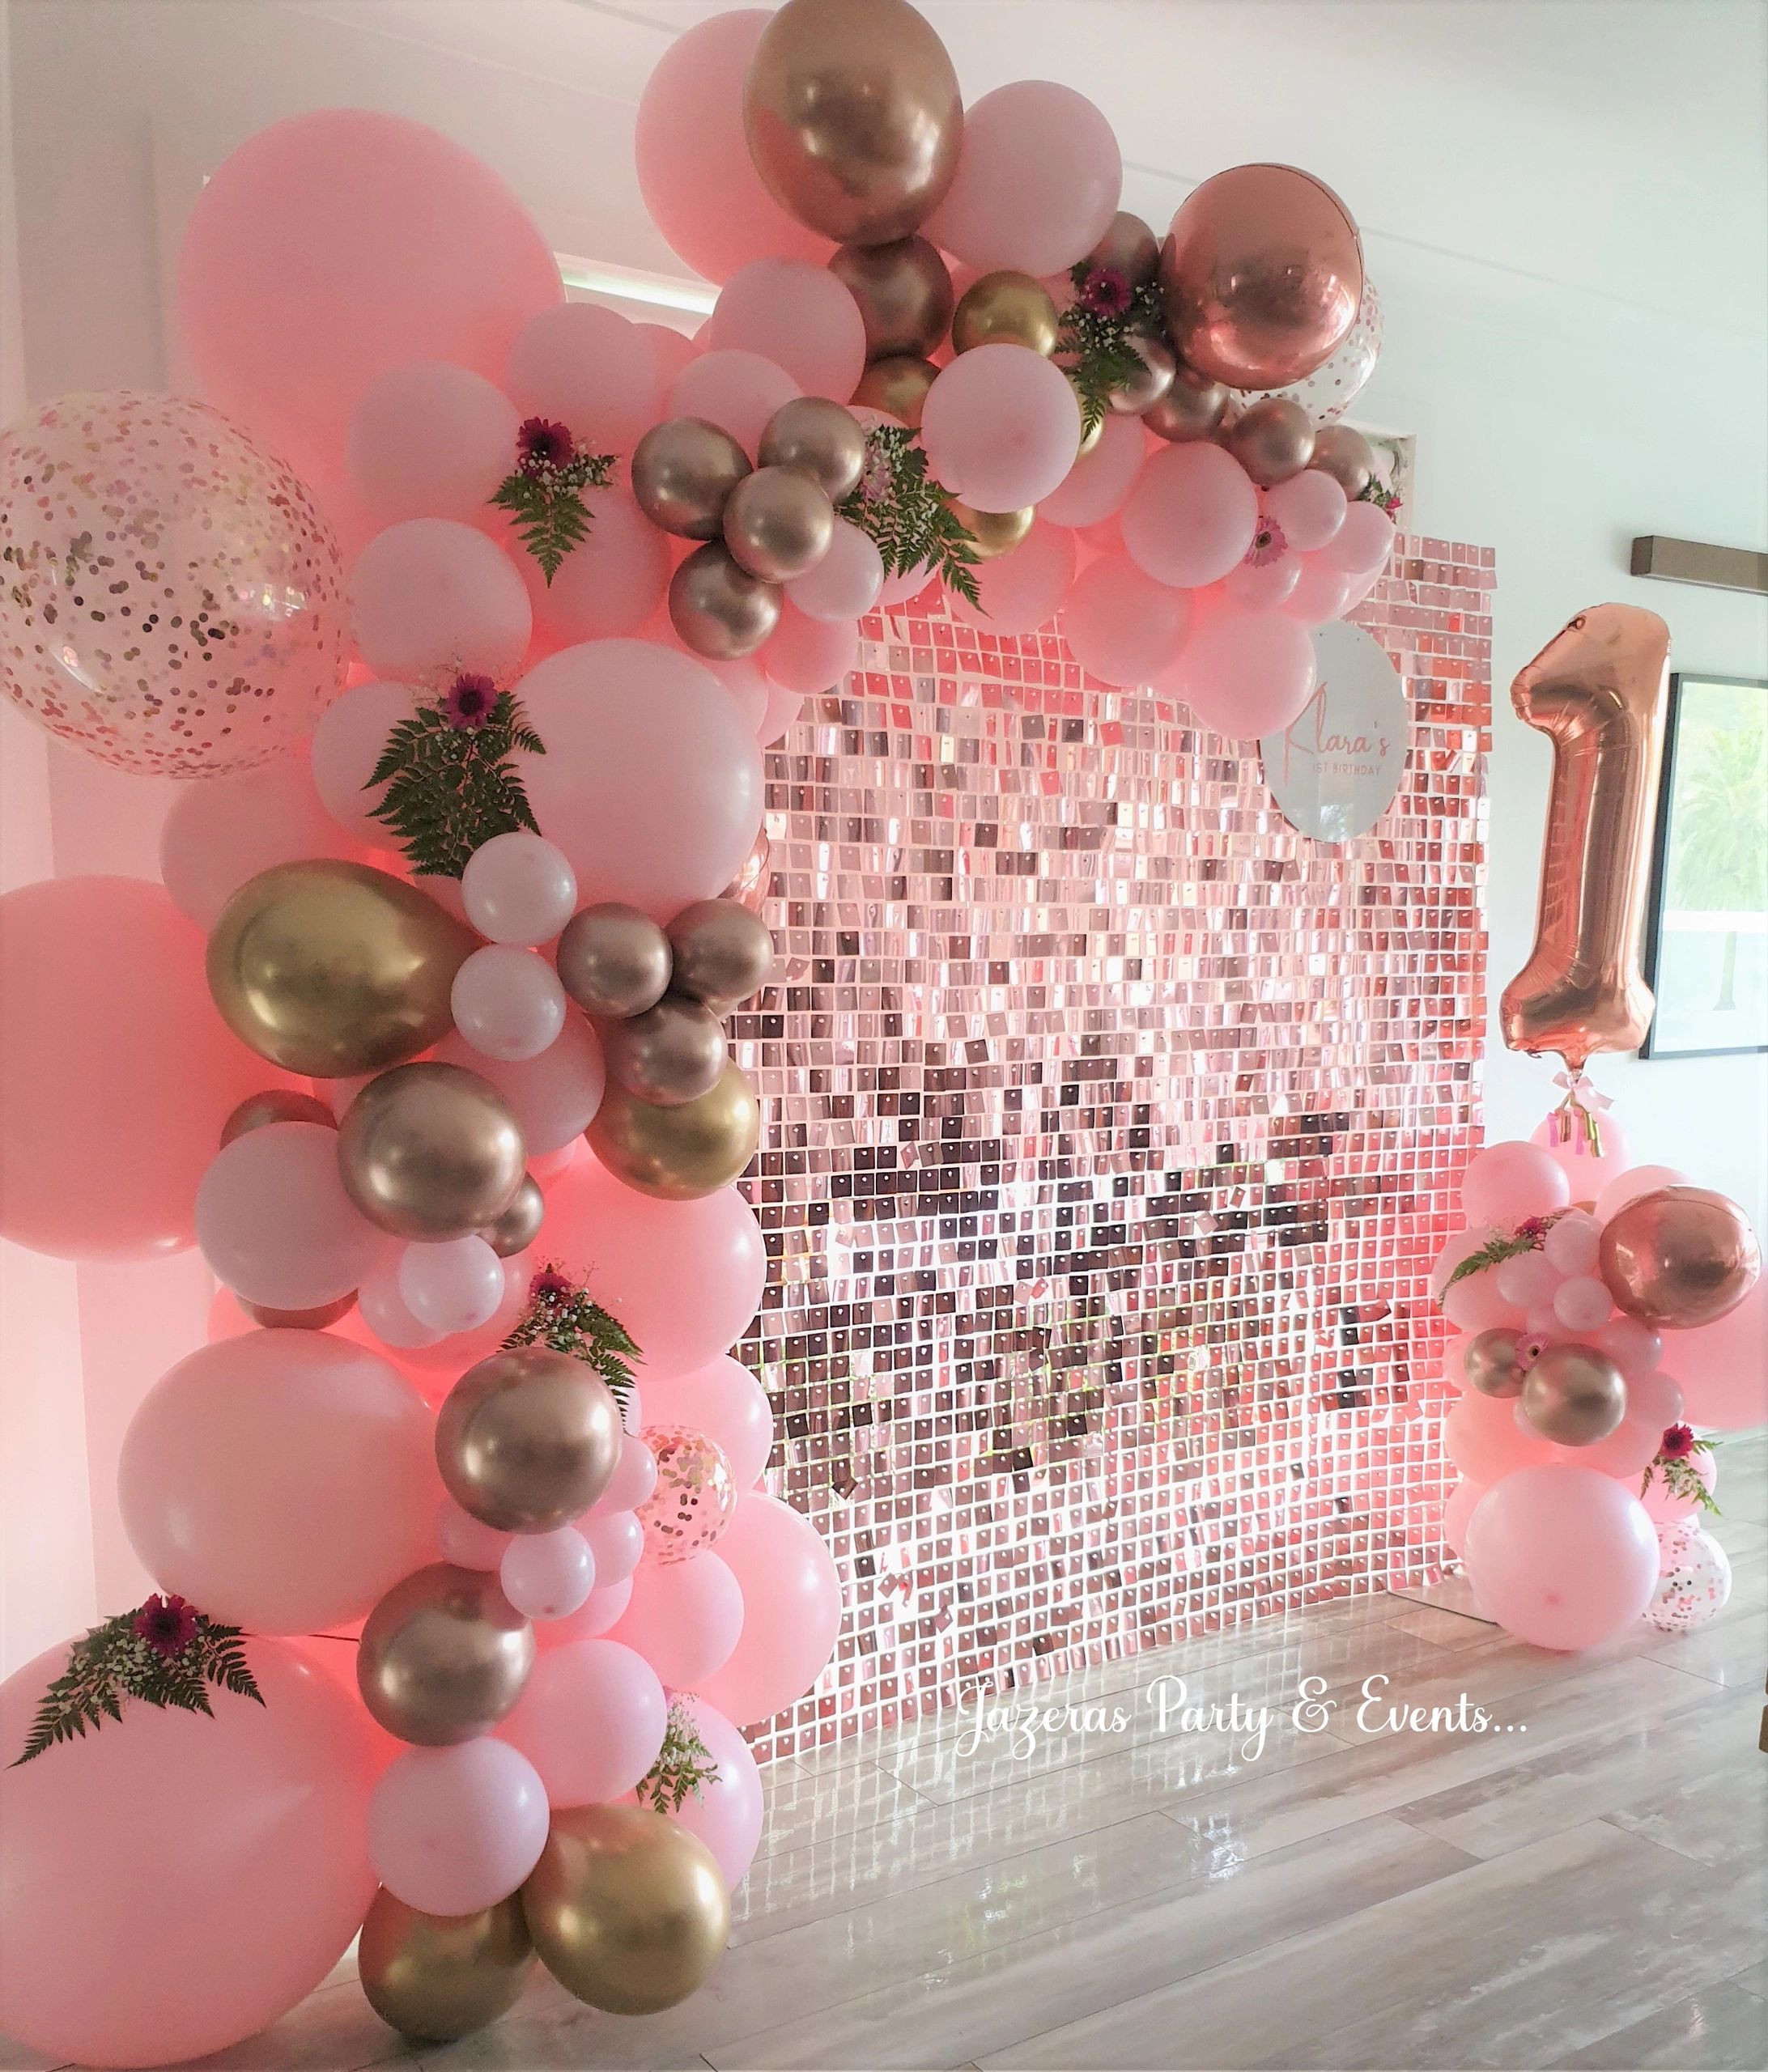 Pink Shimmer wall - approx 2m x 2m
$300 to HIRE on its own
$550 to HIRE including Balloon Garland ar